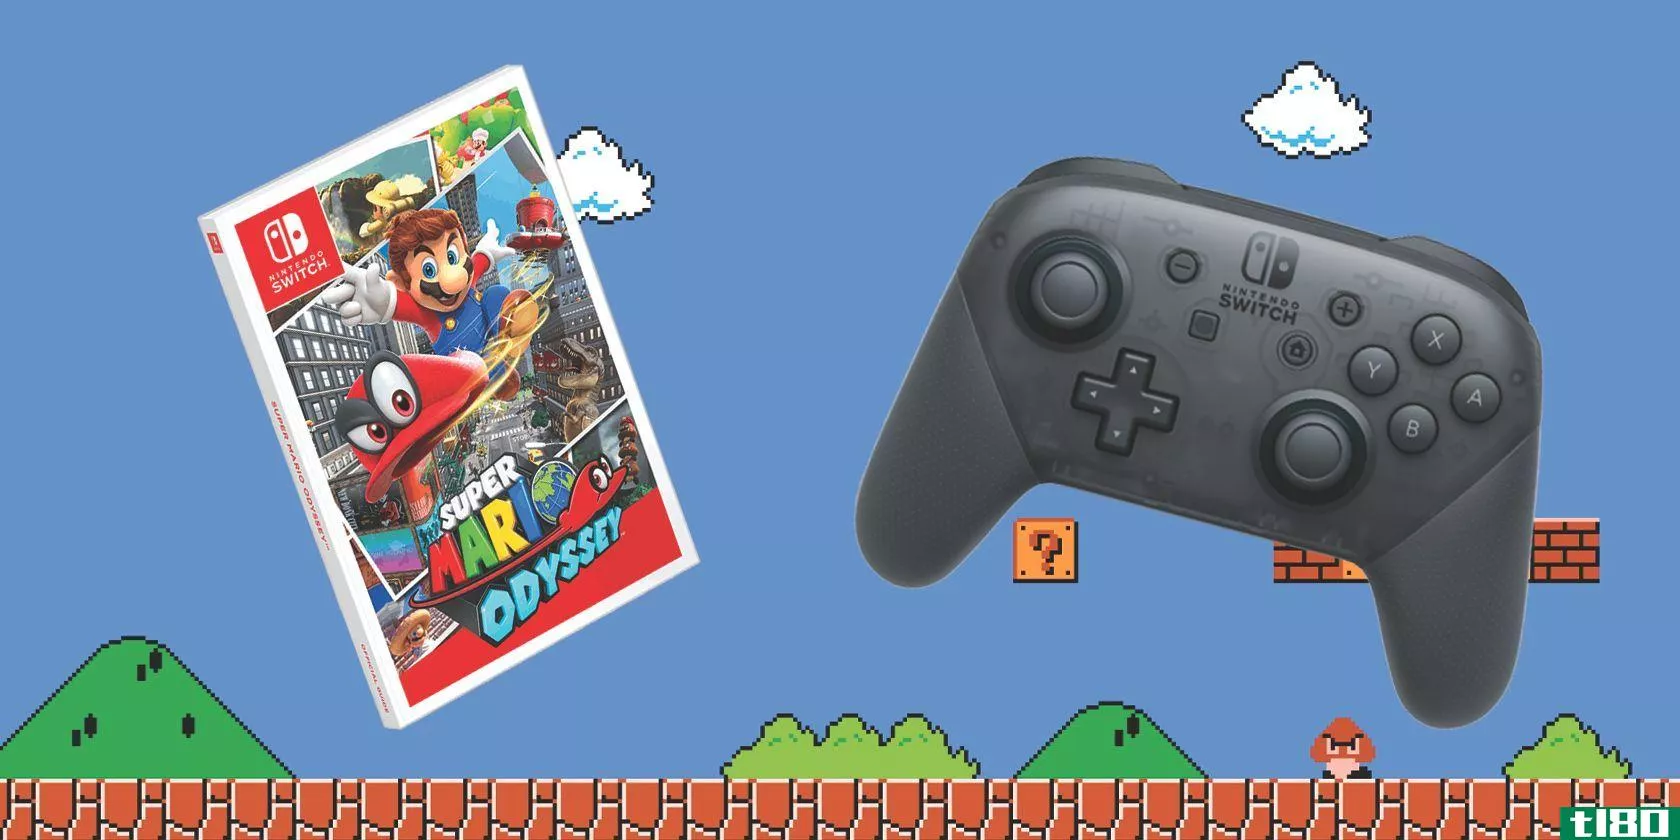 mario odyssey game box with siwtch pro controller on a Super Mario background